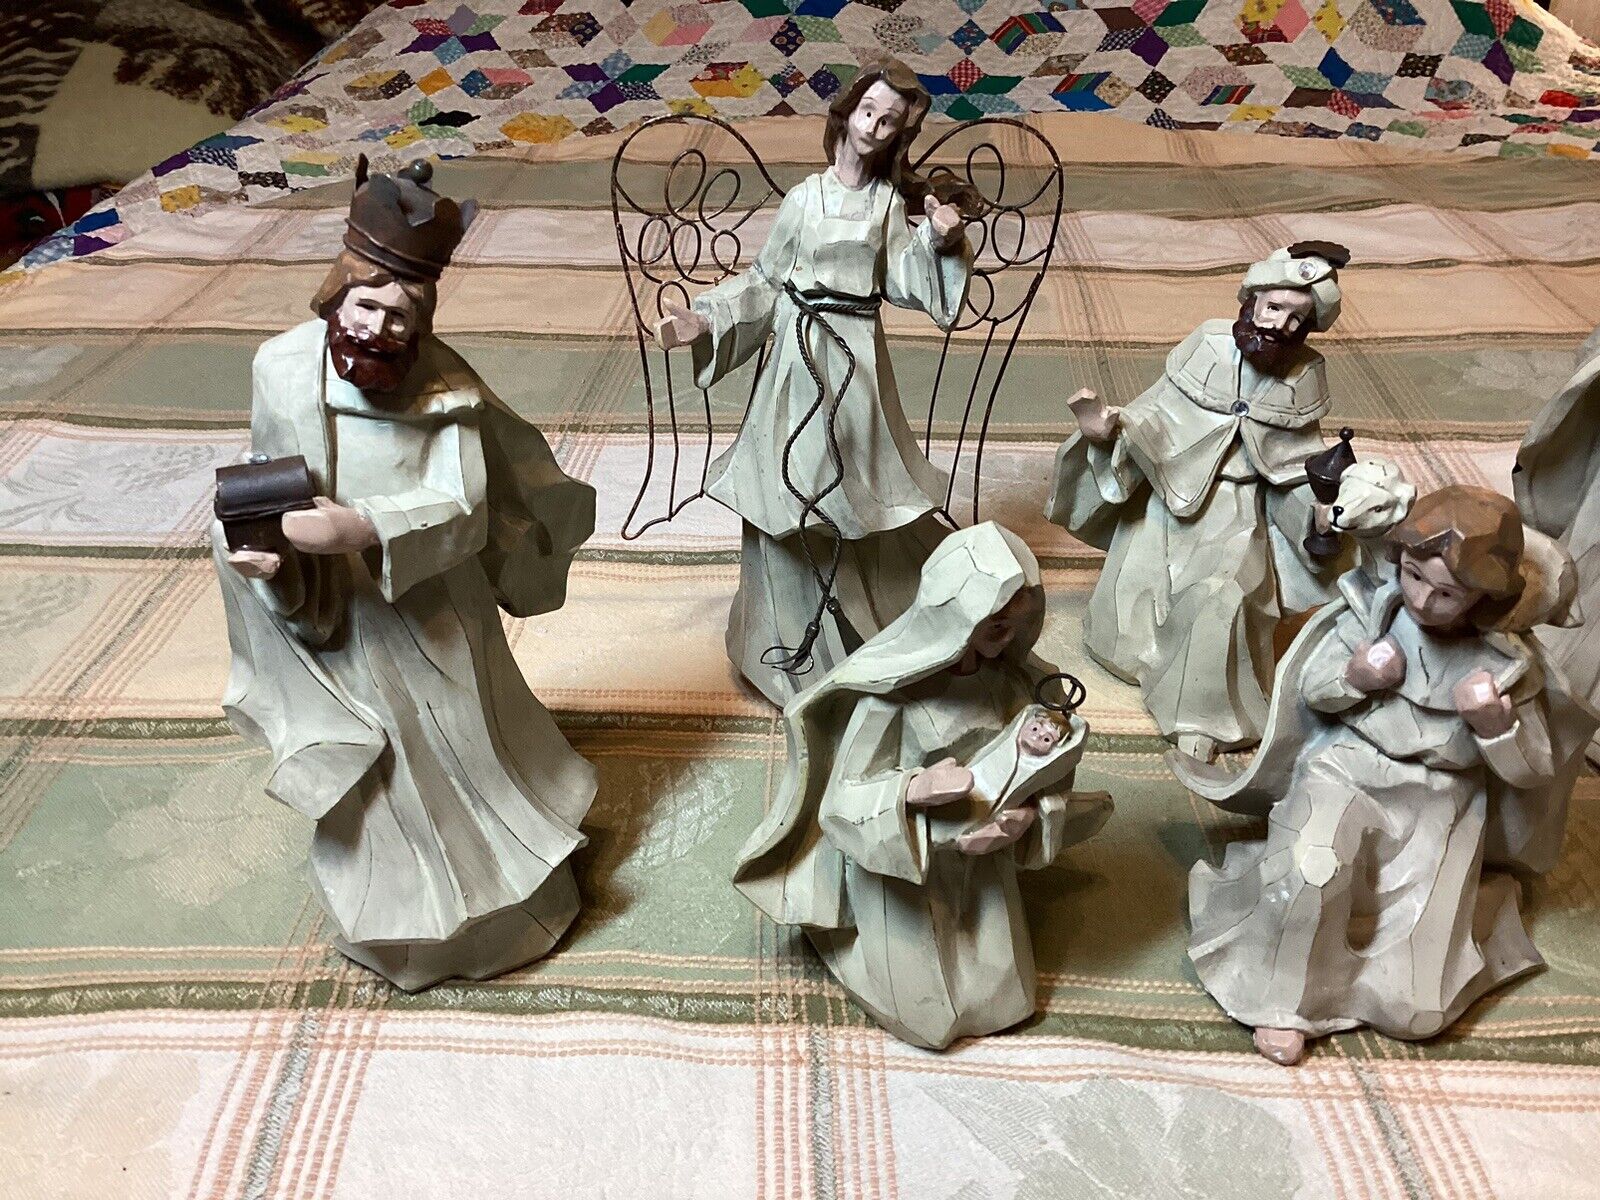 Large Nativity Set 6 Figures 6-10 Inches Tall